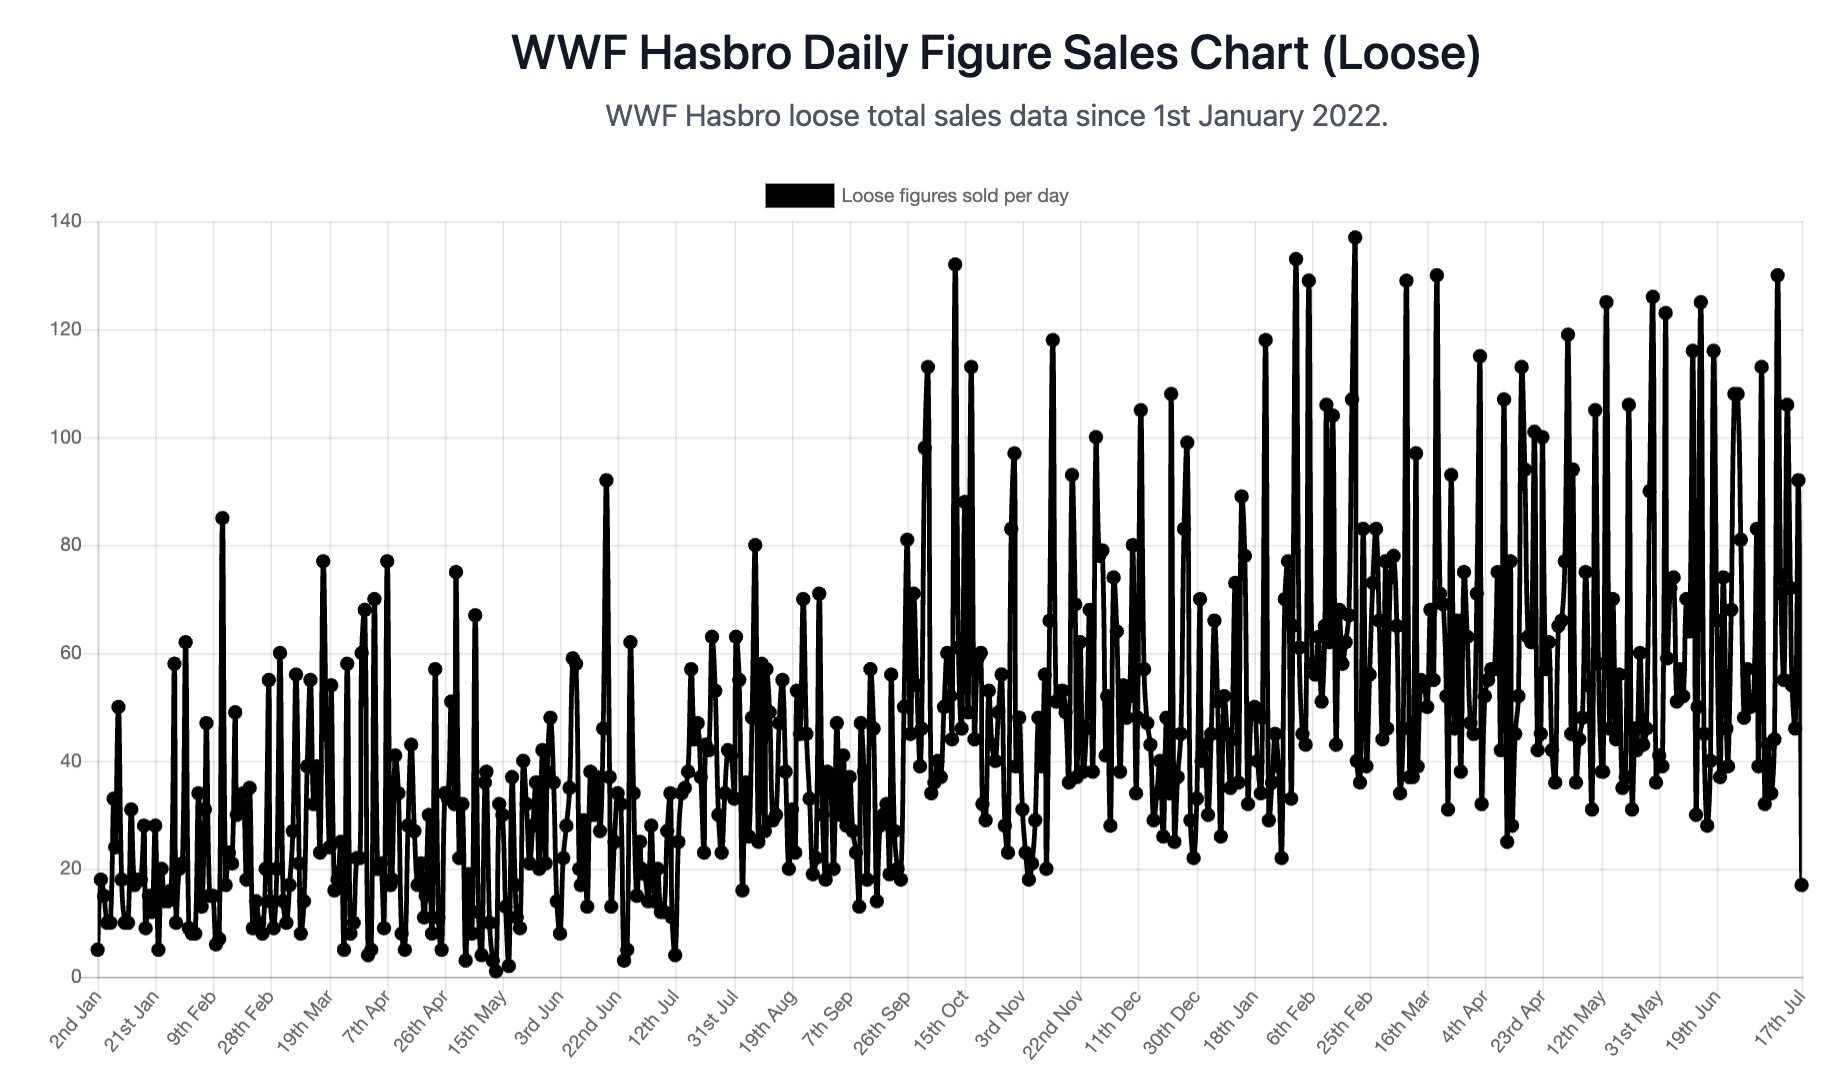 daily loose sales of WWF Hasbro figures